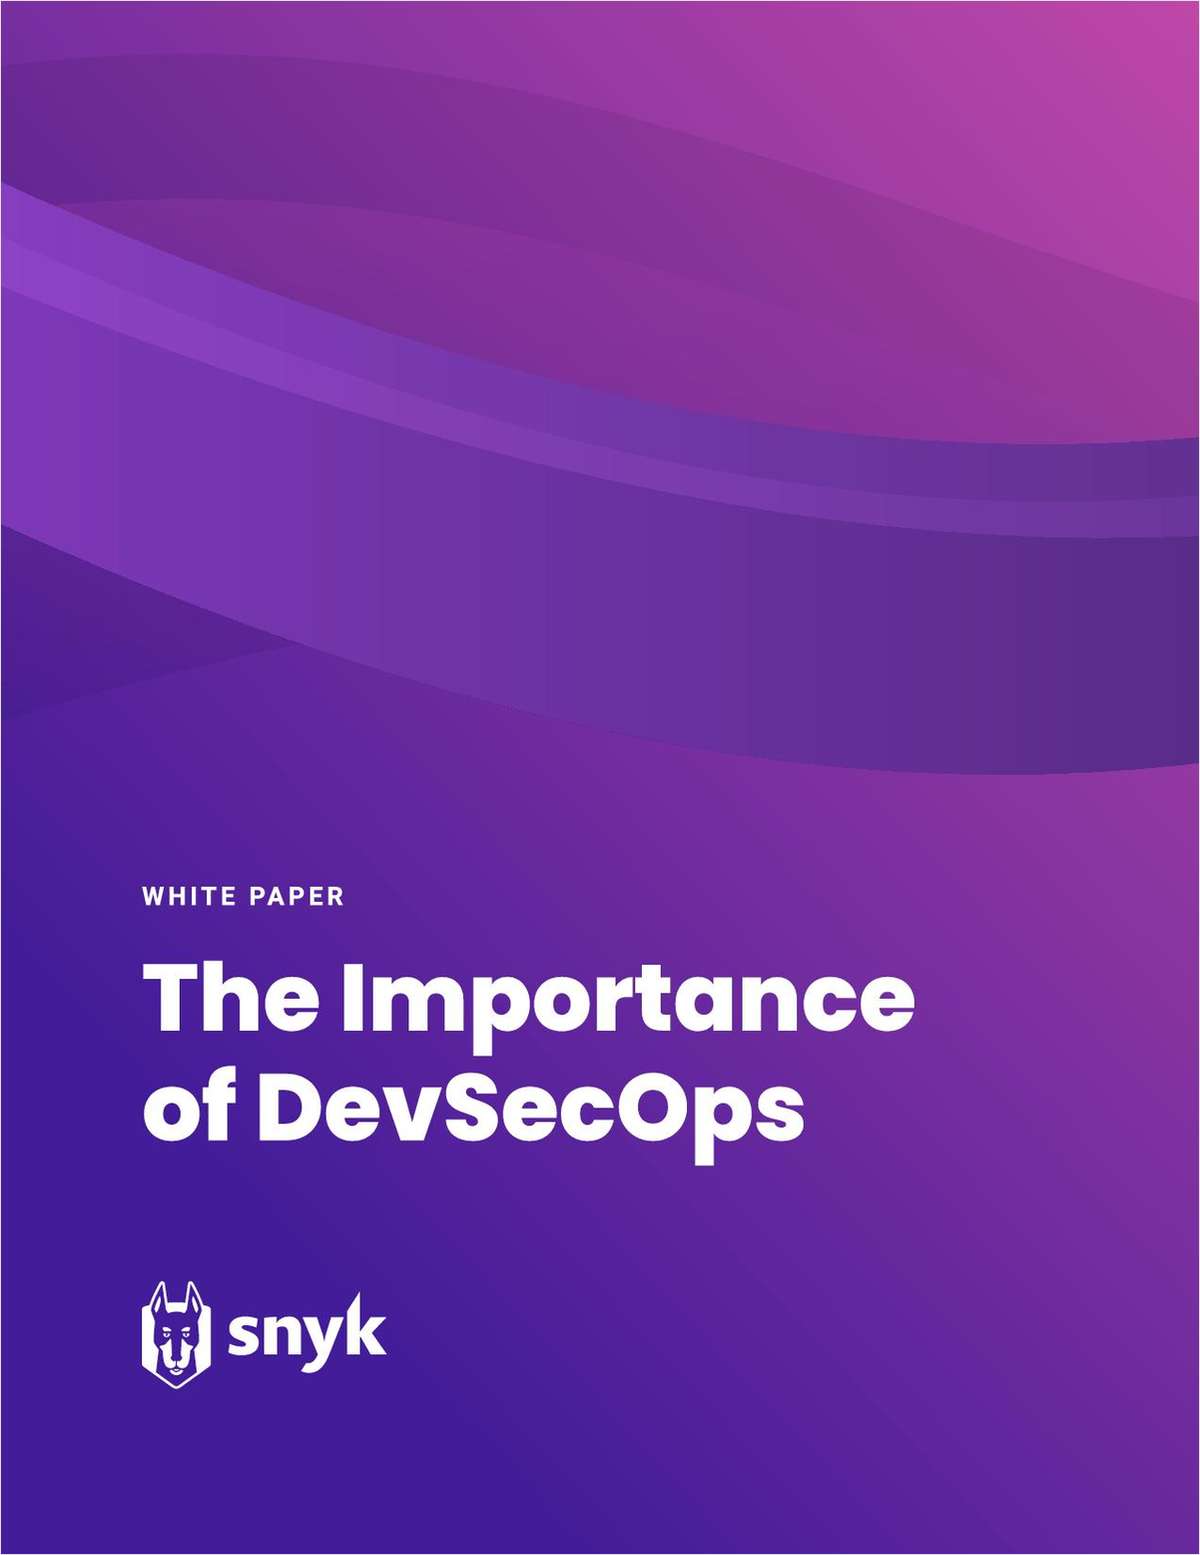 The Importance Adopting DevSecOps